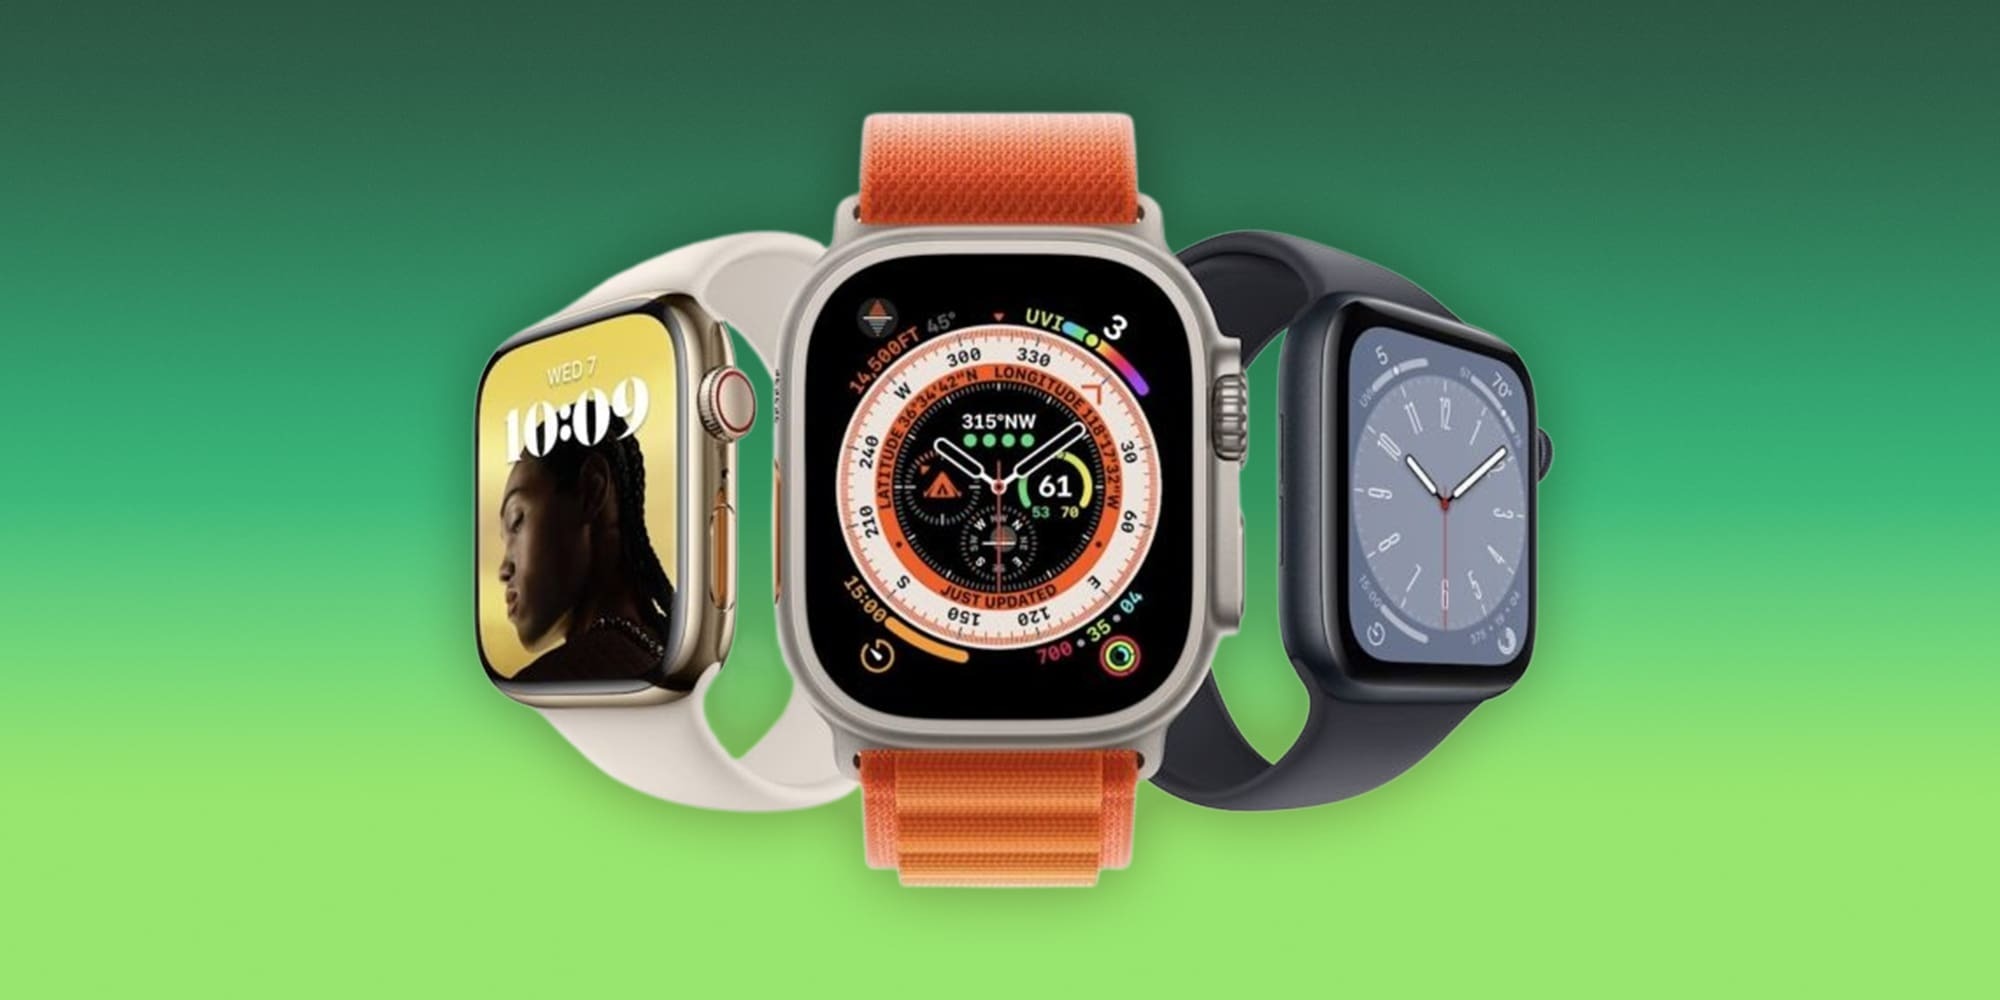 https://9to5mac.com/wp-content/uploads/sites/6/2022/09/how-to-pair-apple-watch-new-iphone.jpg?quality=82&strip=all